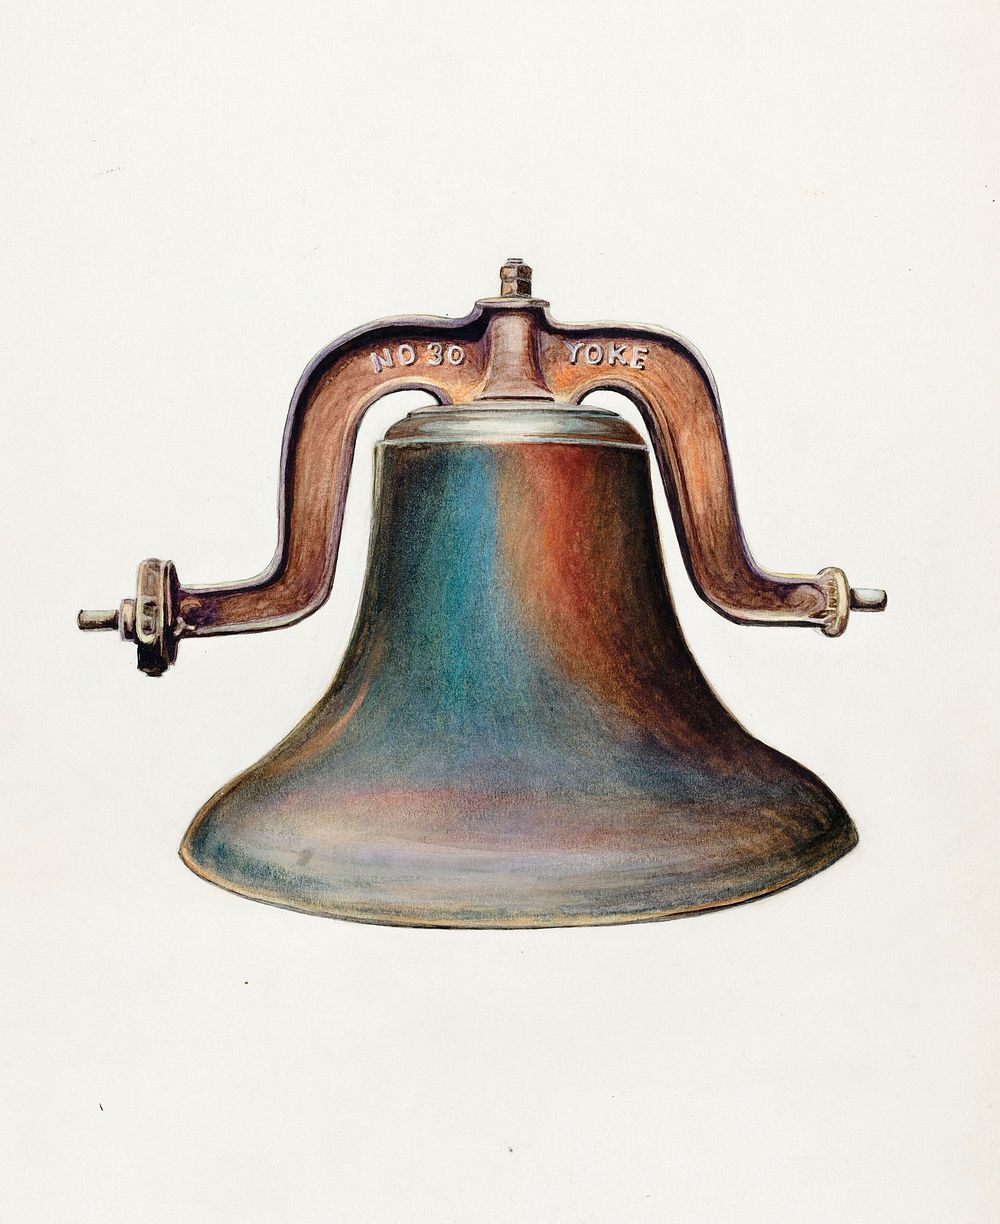 Church Bell (1935&ndash;1942) by unknown American 20th Century artist. Original from The National Gallery of Art. Digitally…